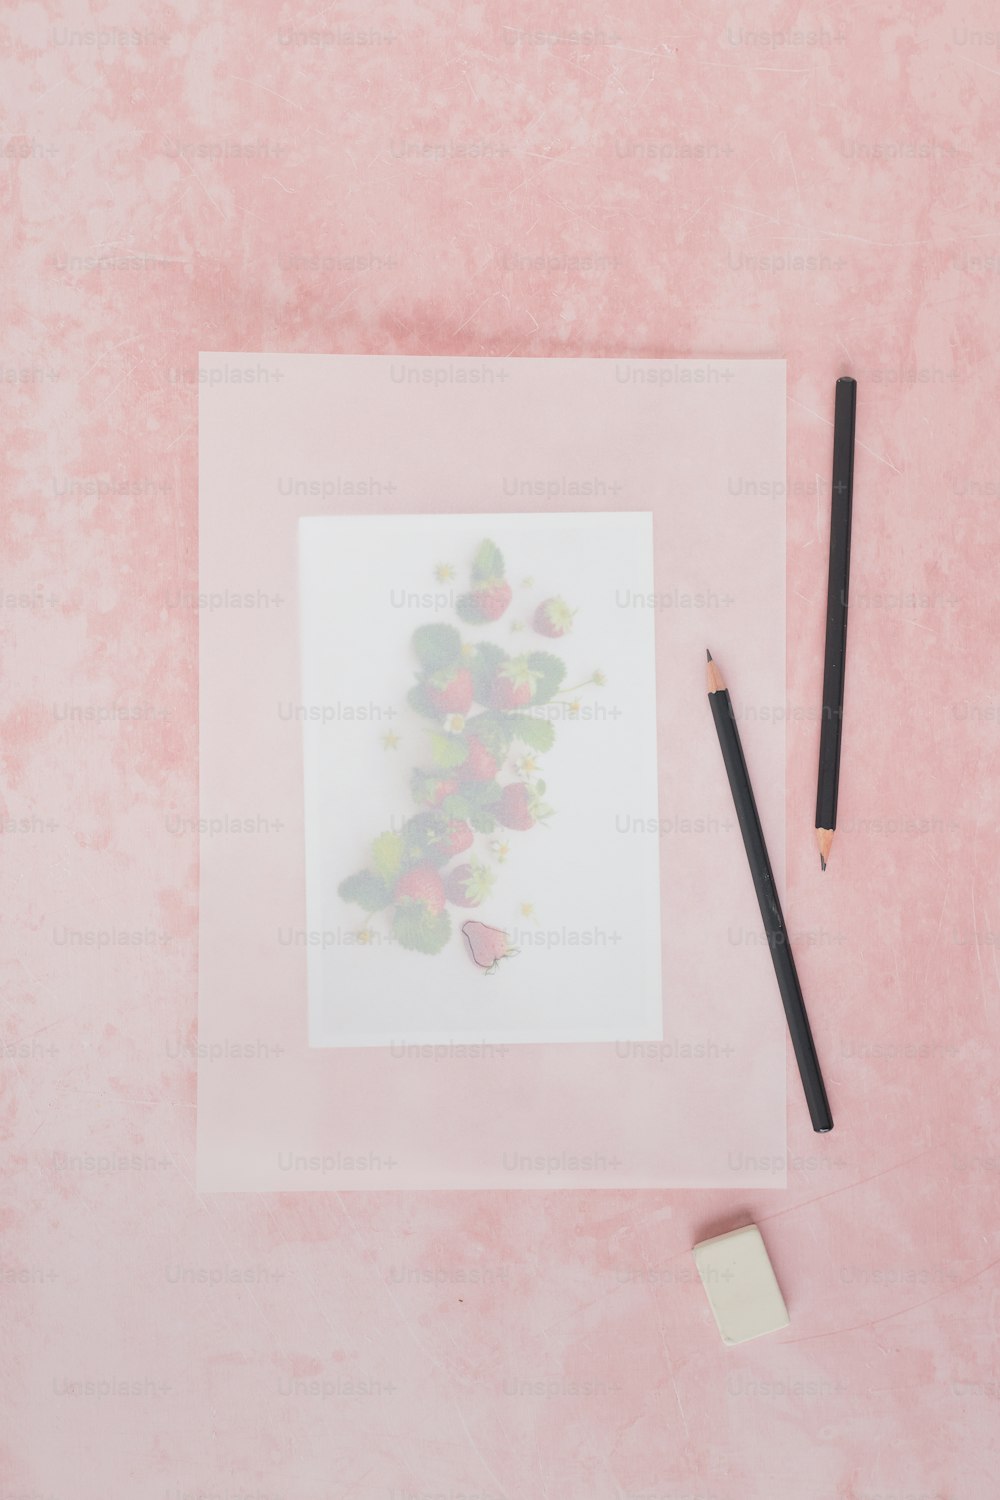 a pencil and a drawing on a pink surface